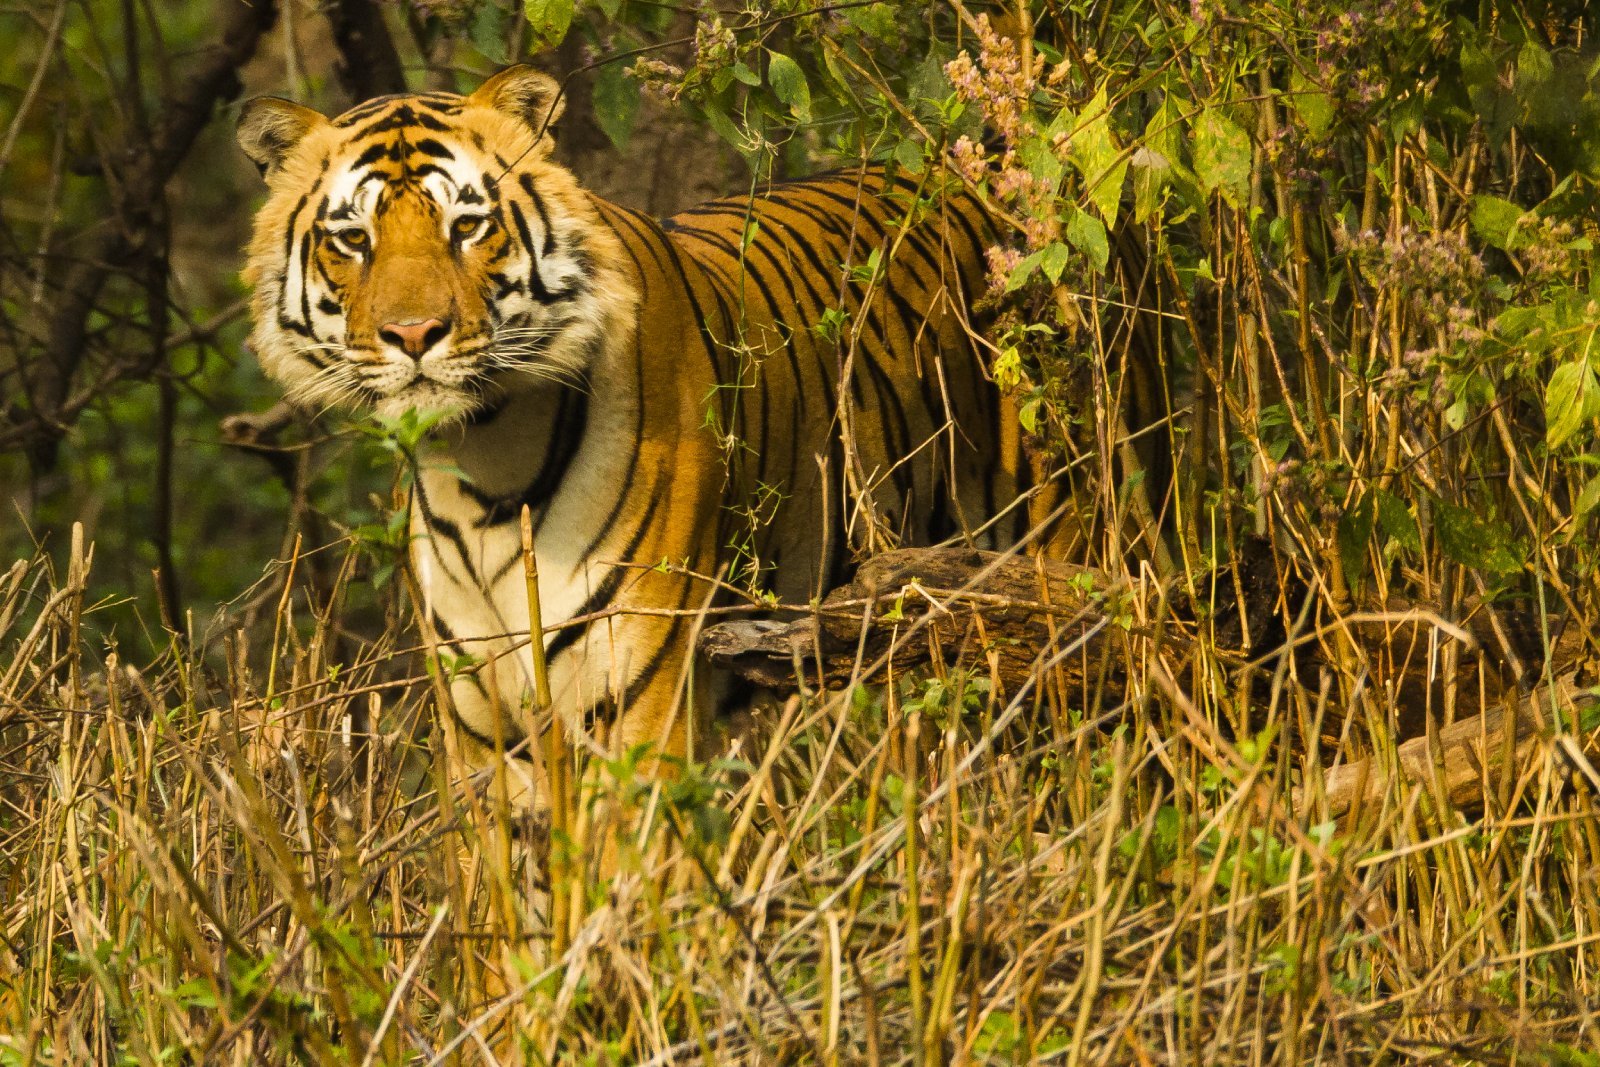 <p class="wp-caption-text">Image Credit: Shutterstock / Joe McDonald</p>  <p><span>Kanha National Park, the inspiration behind Rudyard Kipling’s “The Jungle Book,” offers one of India’s best wildlife safari experiences. Its sal and bamboo forests, grassy meadows, and ravines harbor a significant population of Bengal tigers, leopards, sloth bears, and barasingha, also known as the swamp deer. The park’s conservation efforts have made it a model for wildlife protection. Jeep safaris provide the chance to explore this vast landscape and its diverse fauna.</span></p>